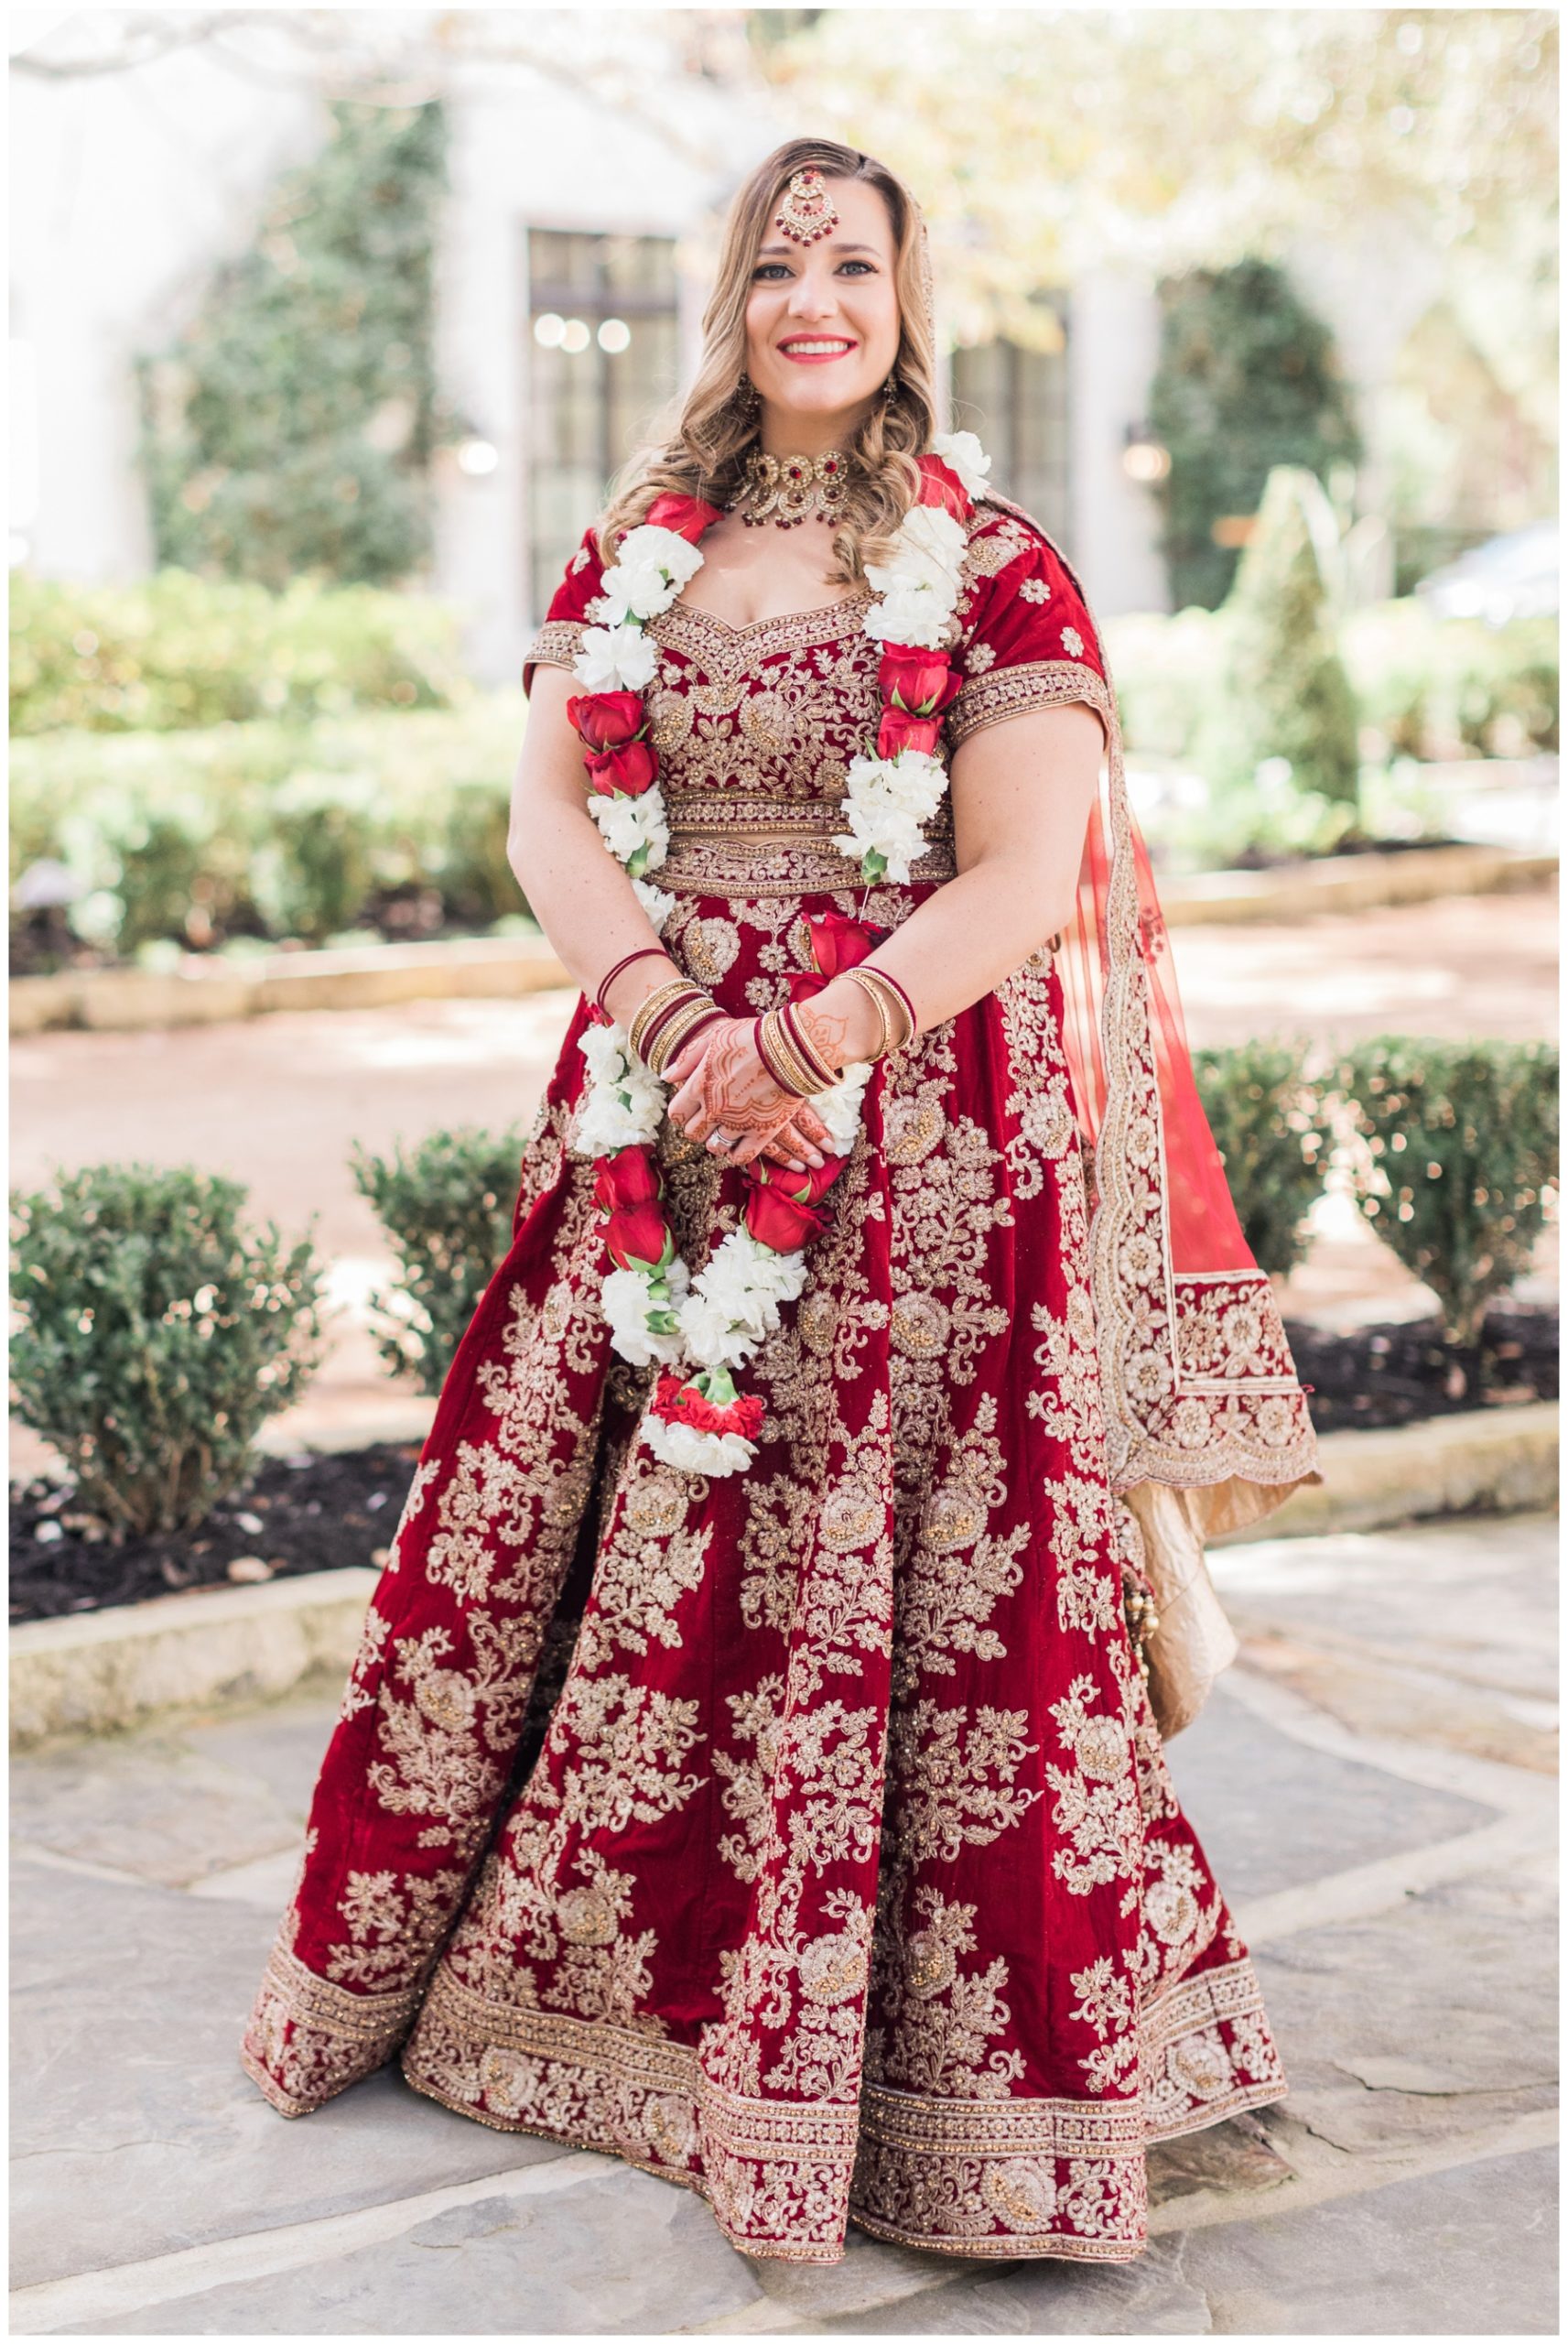 Bride in a red and gold custom Indian wedding dress from Maharani Fashions